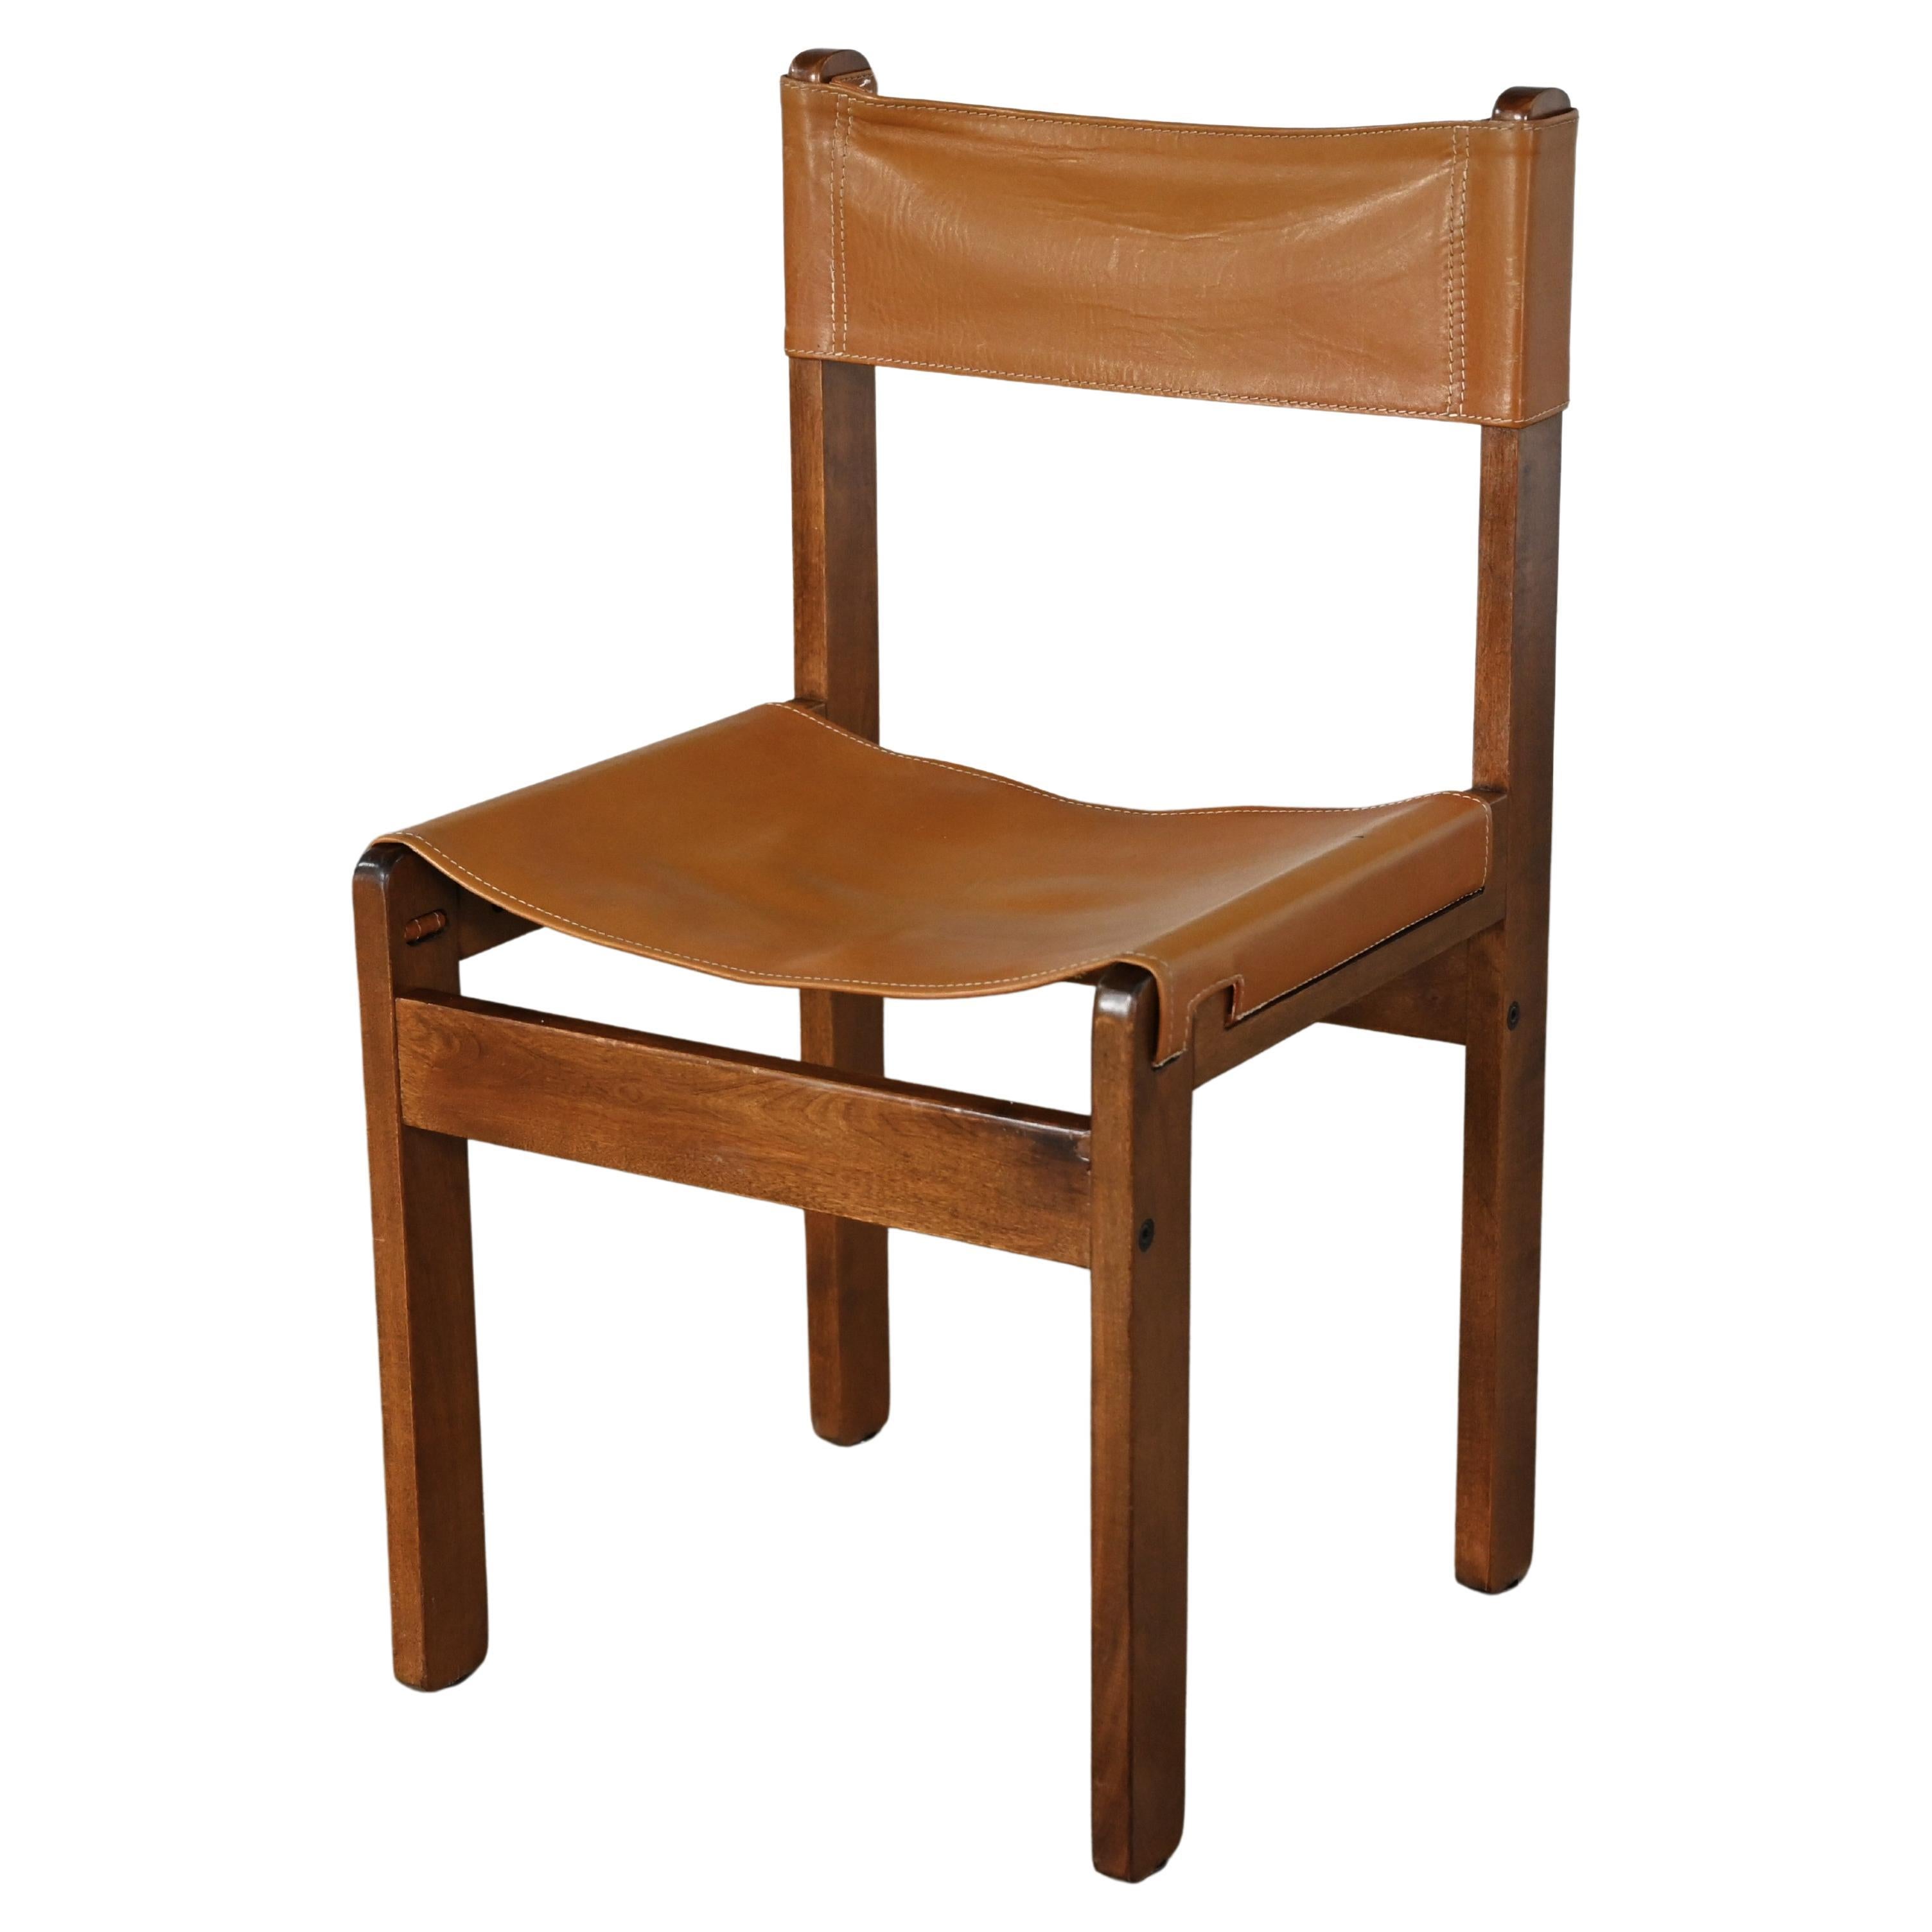 1970’s Modern Sling Chair Teak & Leather Style Michel Arnoult Made in Argentina For Sale